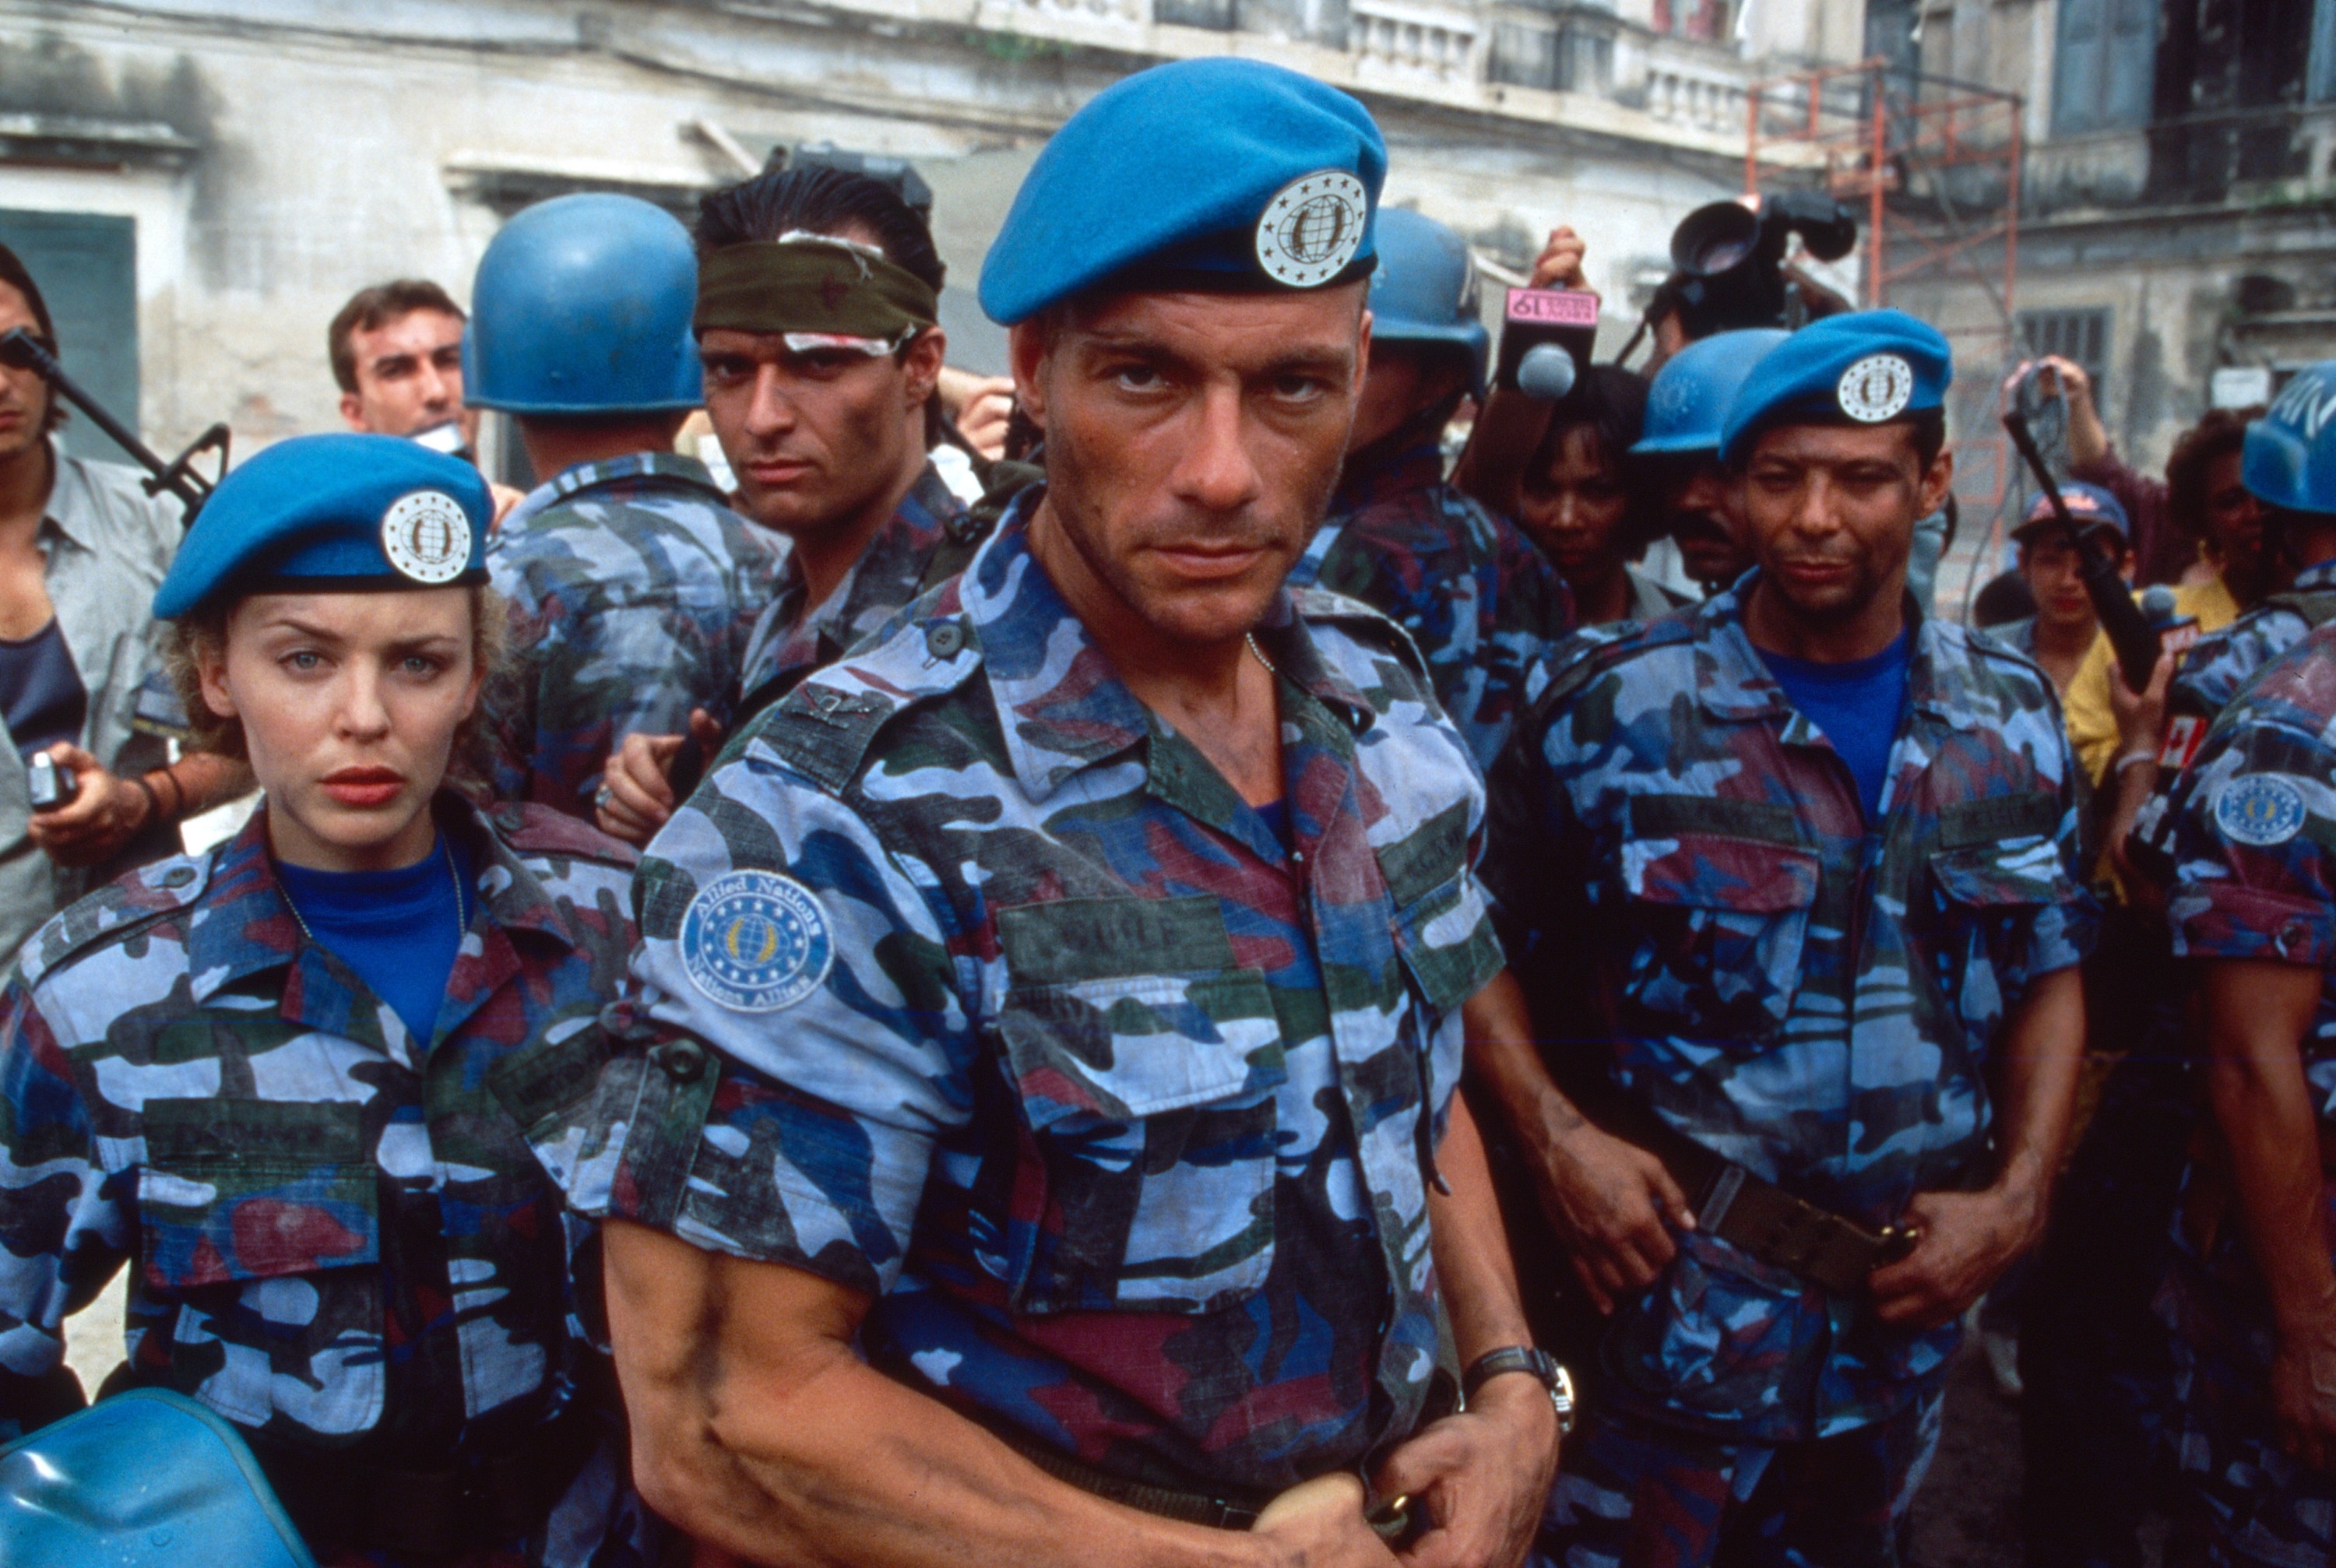 Jean-Claude Van Damme in military attire with extras in &quot;Street Fighter&quot; film